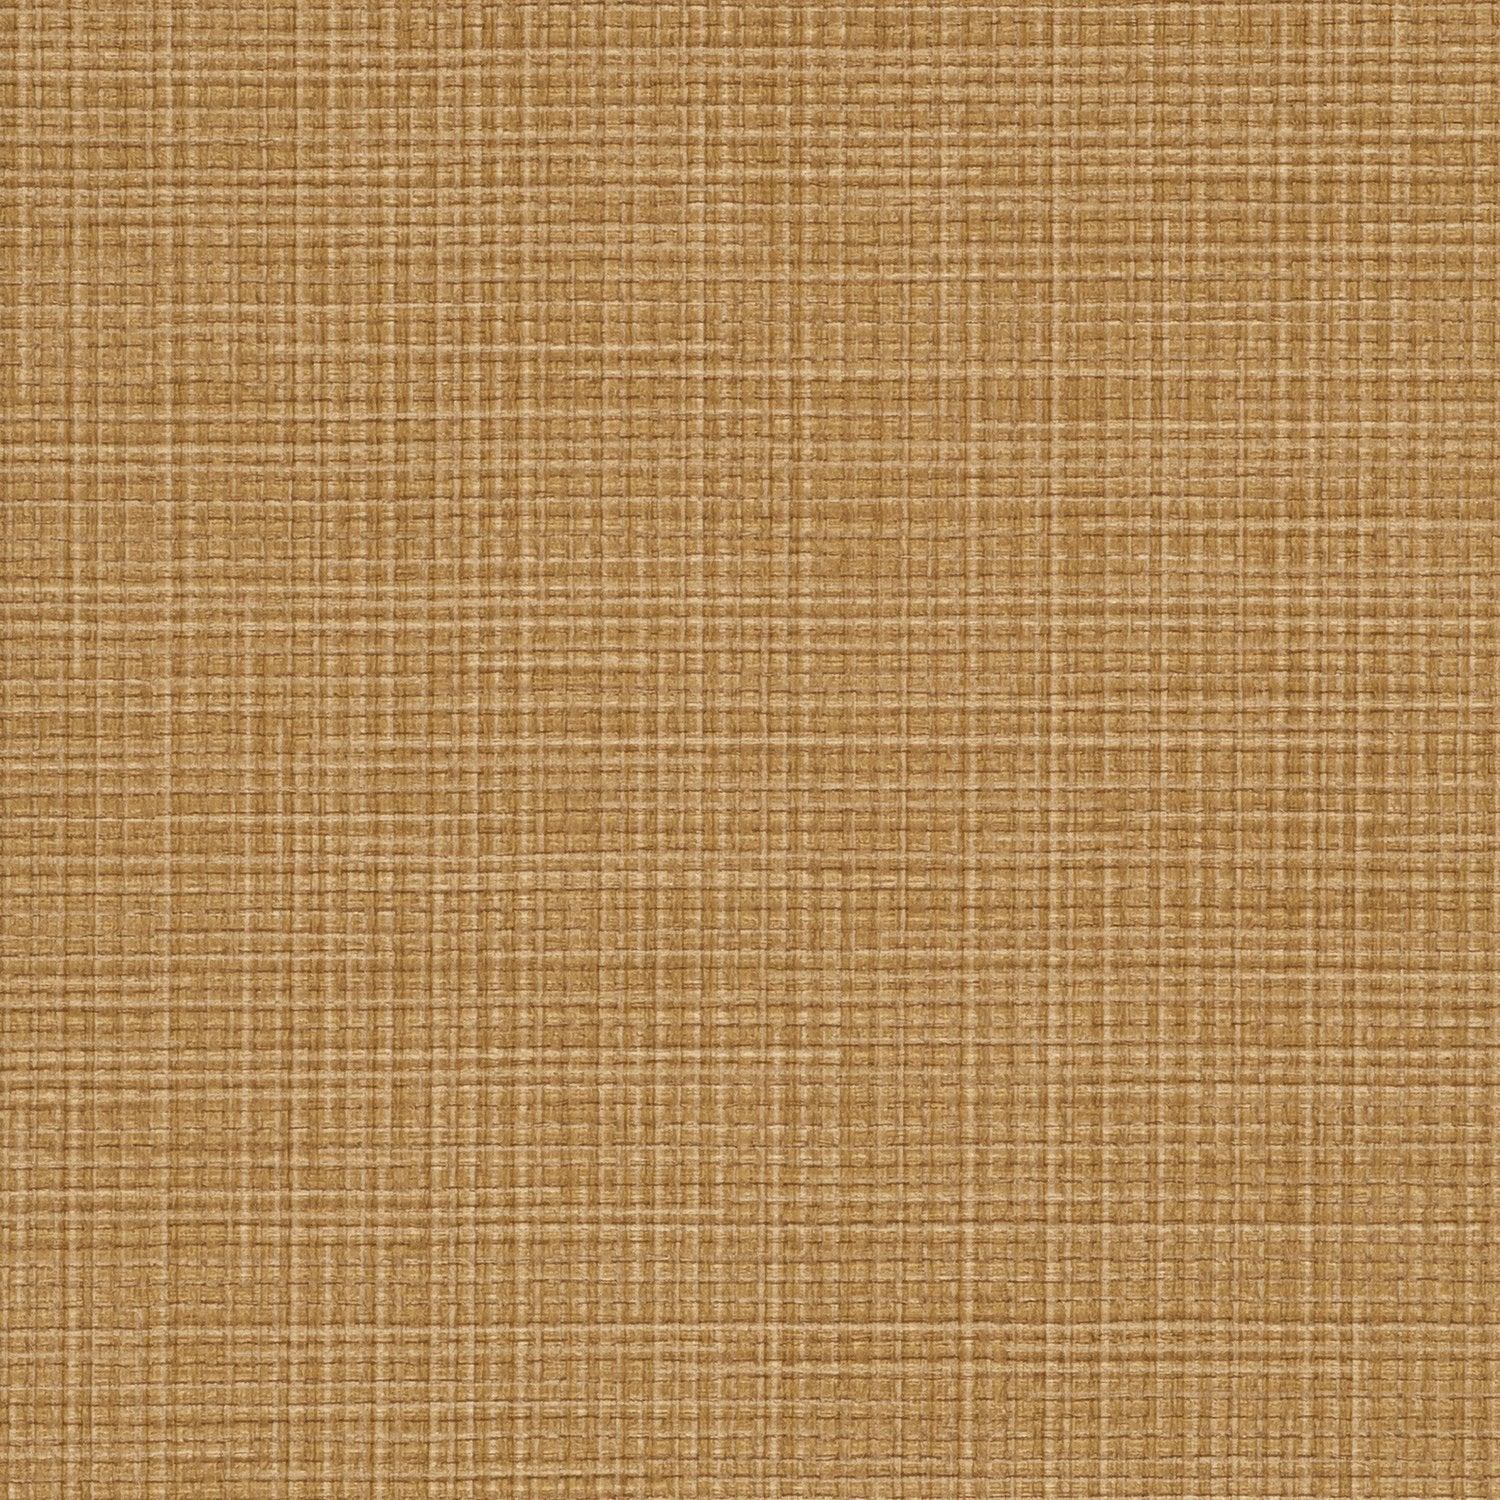 Pave - Y46298 - Wallcovering - Vycon - Kube Contract